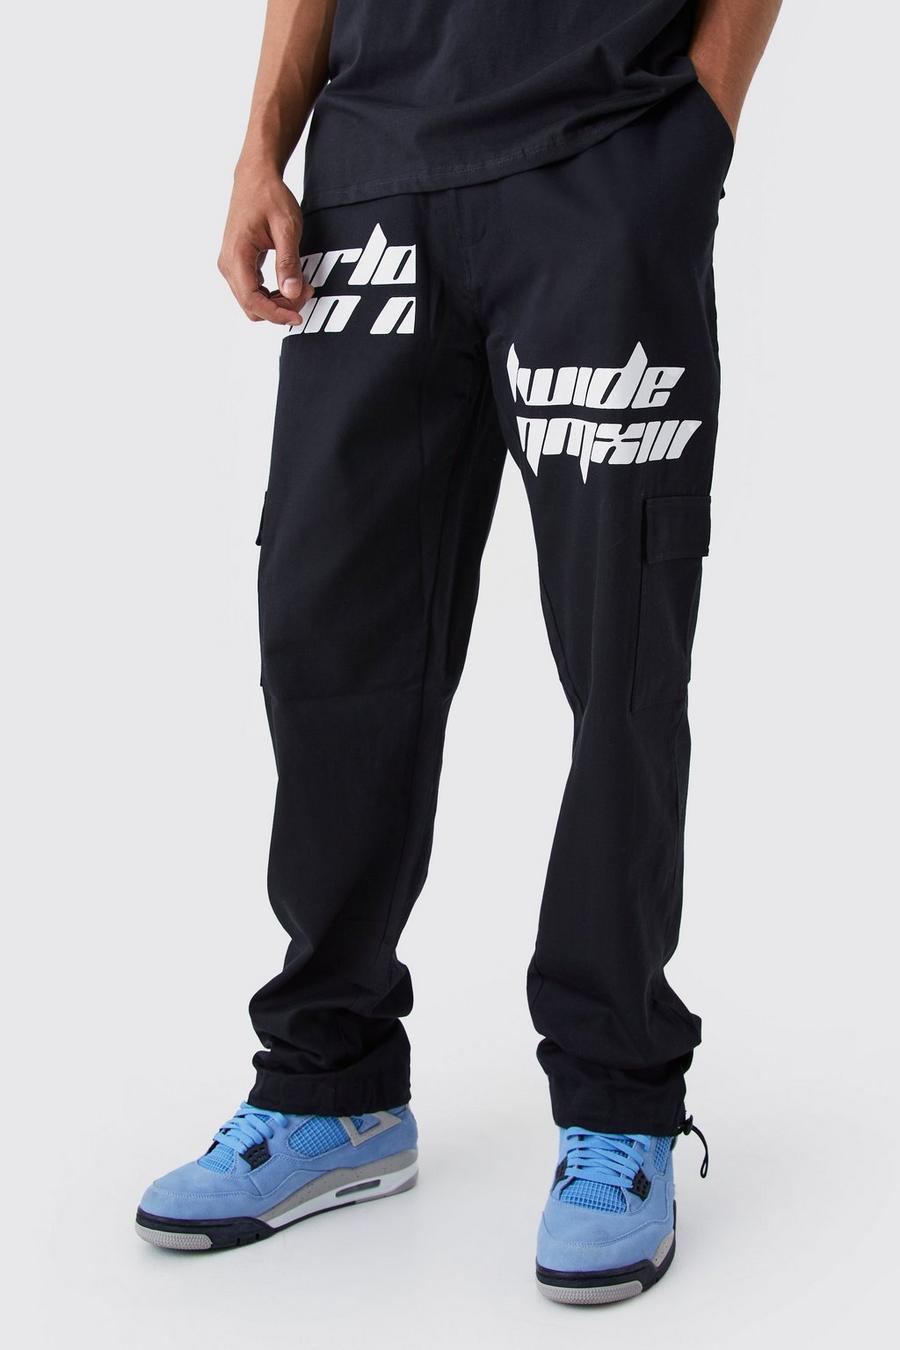 Black Tall Relaxed Cargo Spliced Text Print Pants